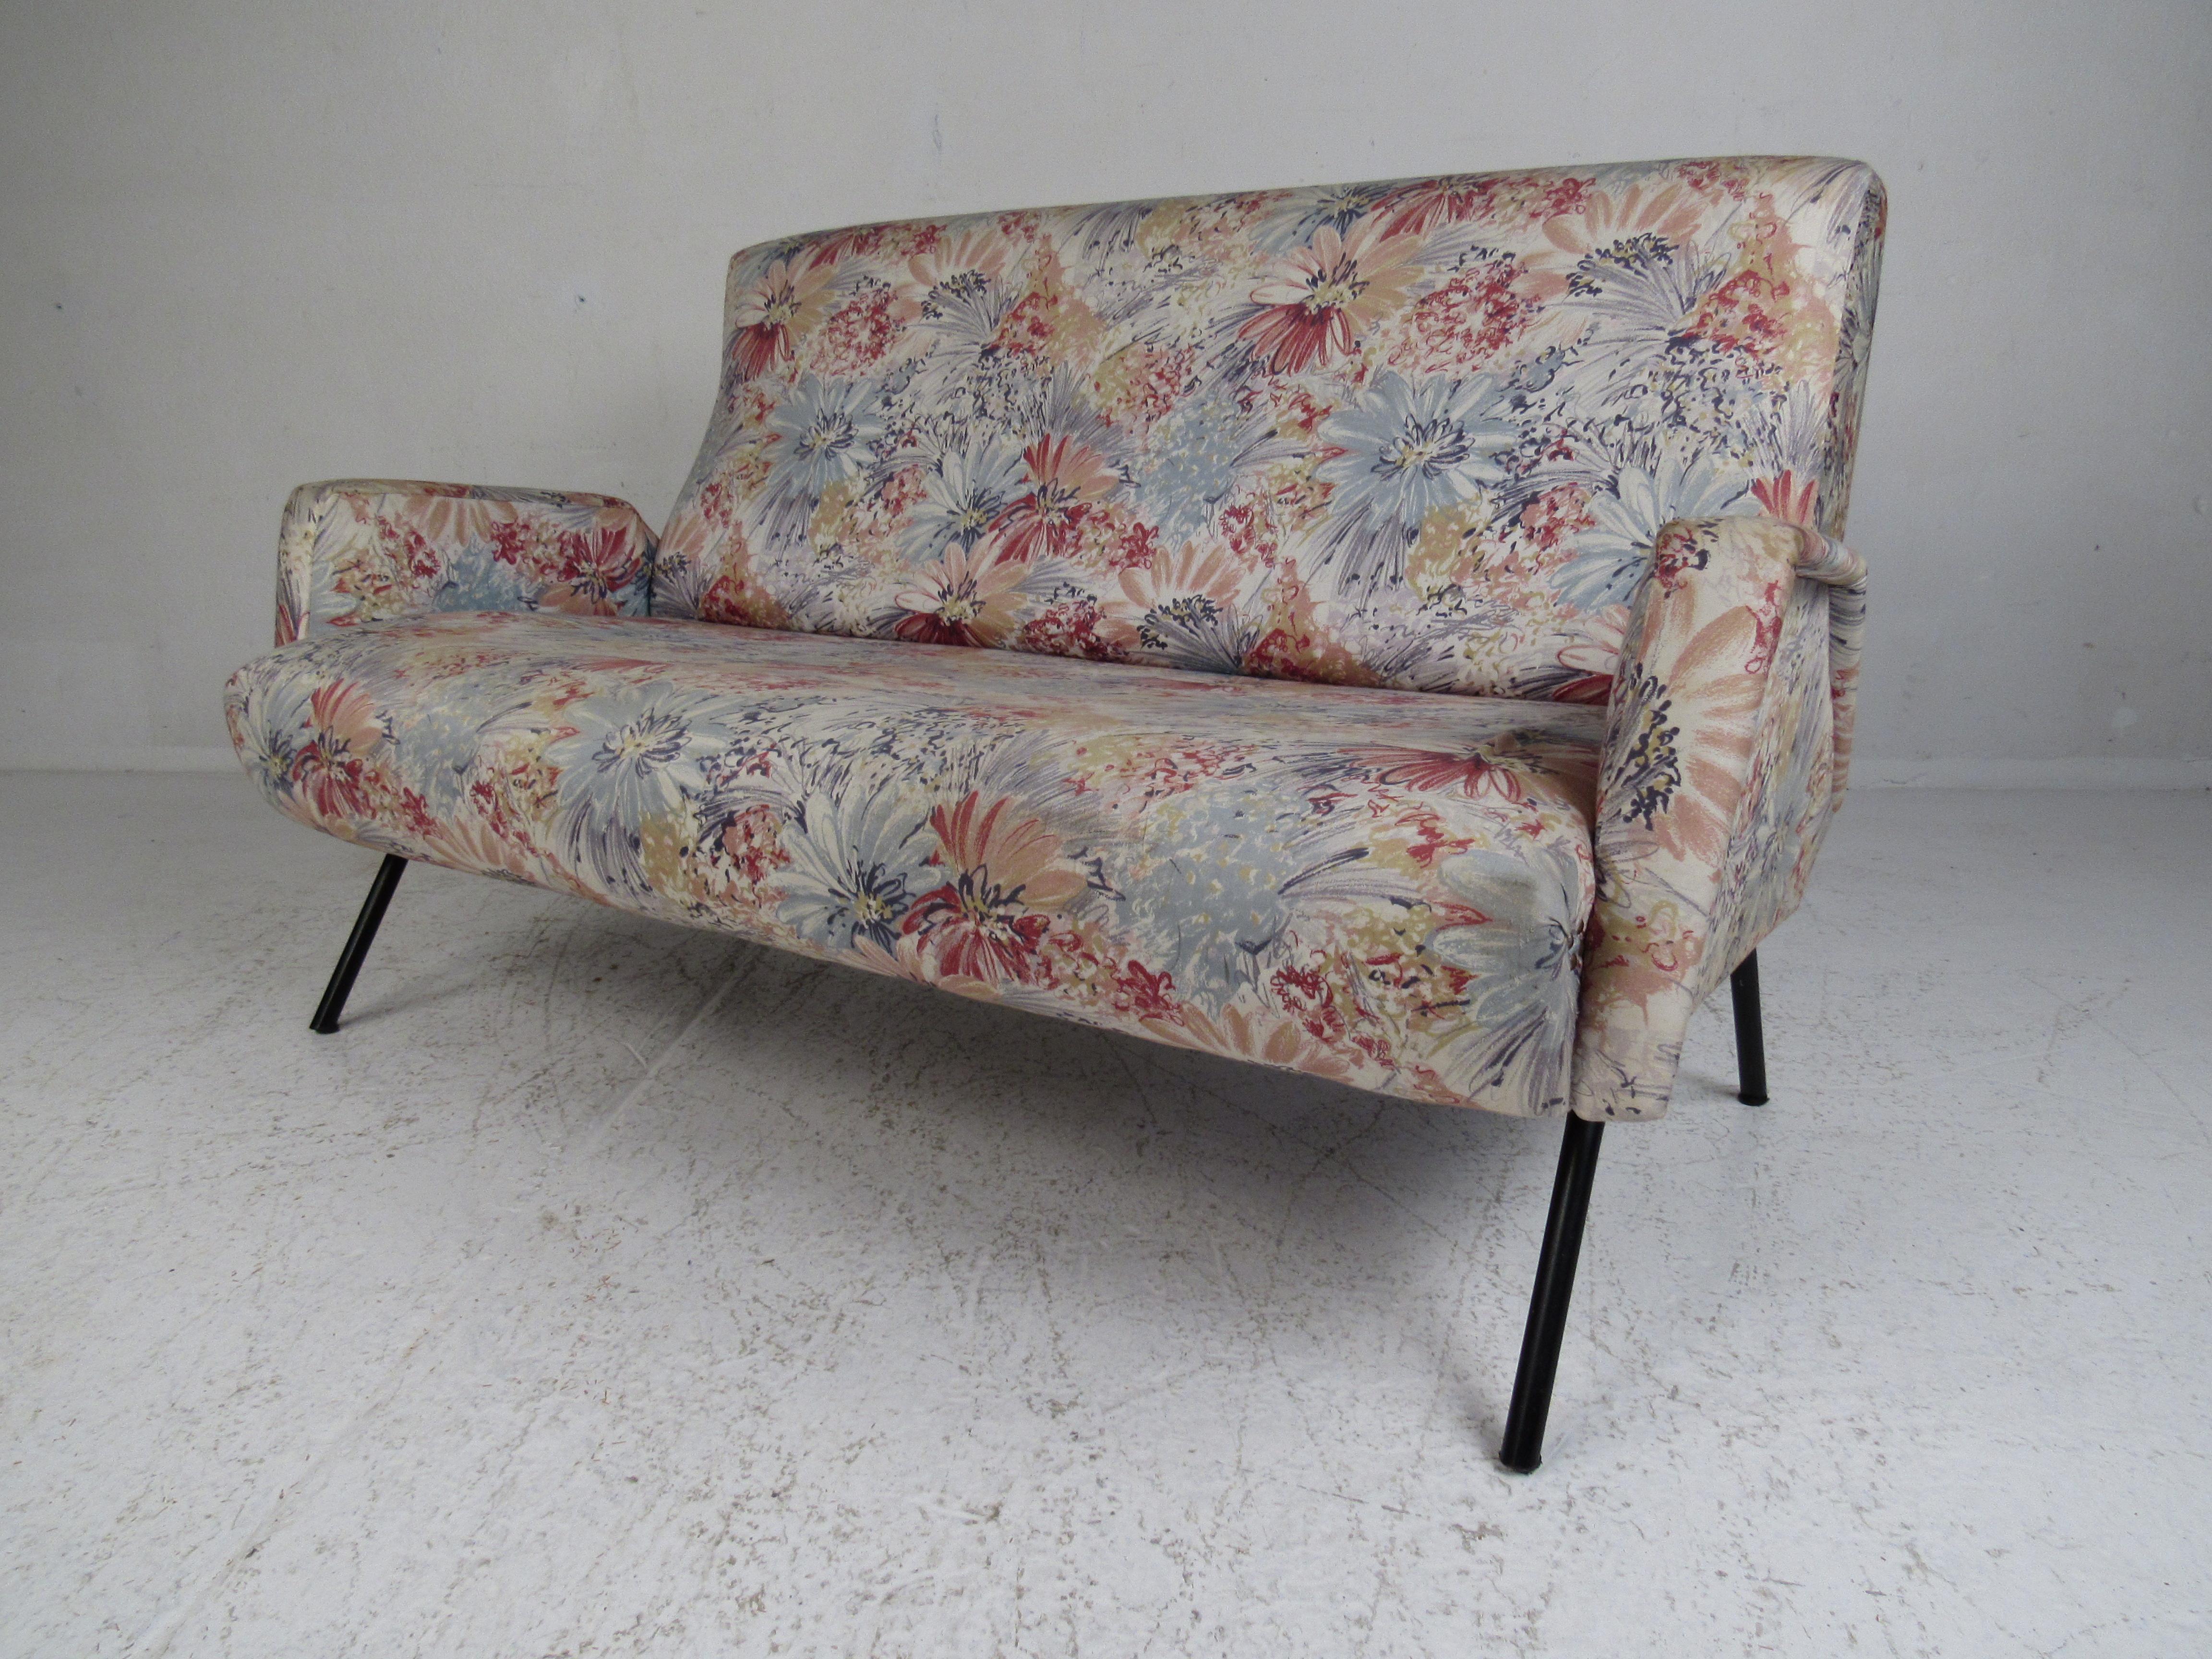 This stunning vintage modern sofa features unique sculpted armrests and a metal base. A stylish and comfortable design with thick padded seating covered in decorative floral upholstery. This wonderful midcentury settee is sure to make a lasting